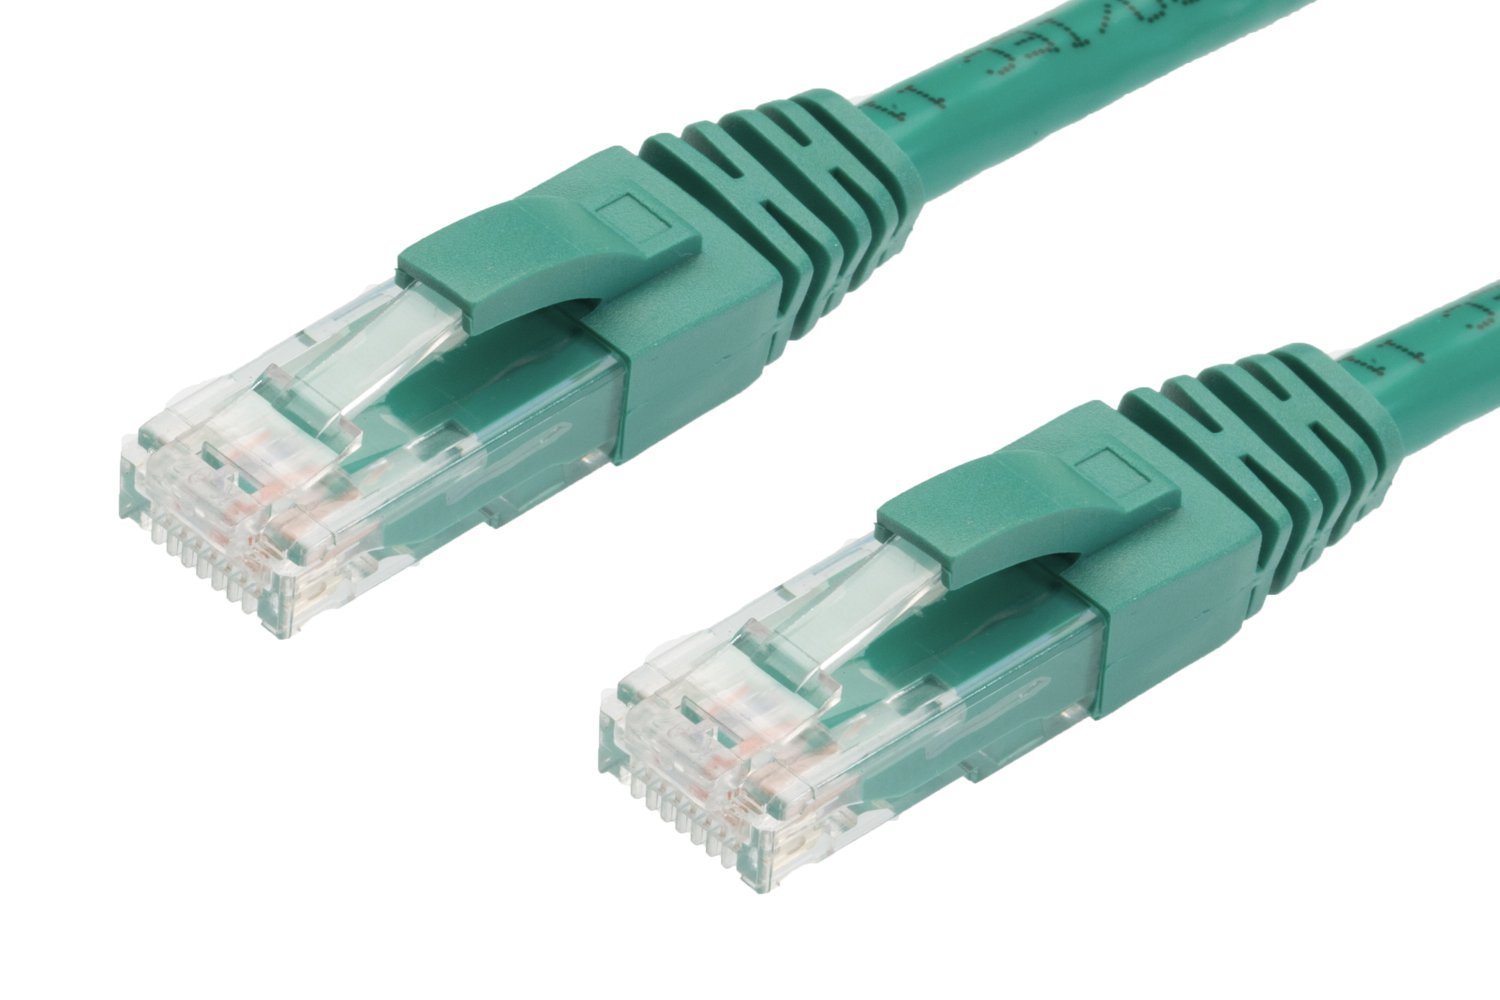 4Cabling 3M Cat 5E Ethernet Network Cable: Green